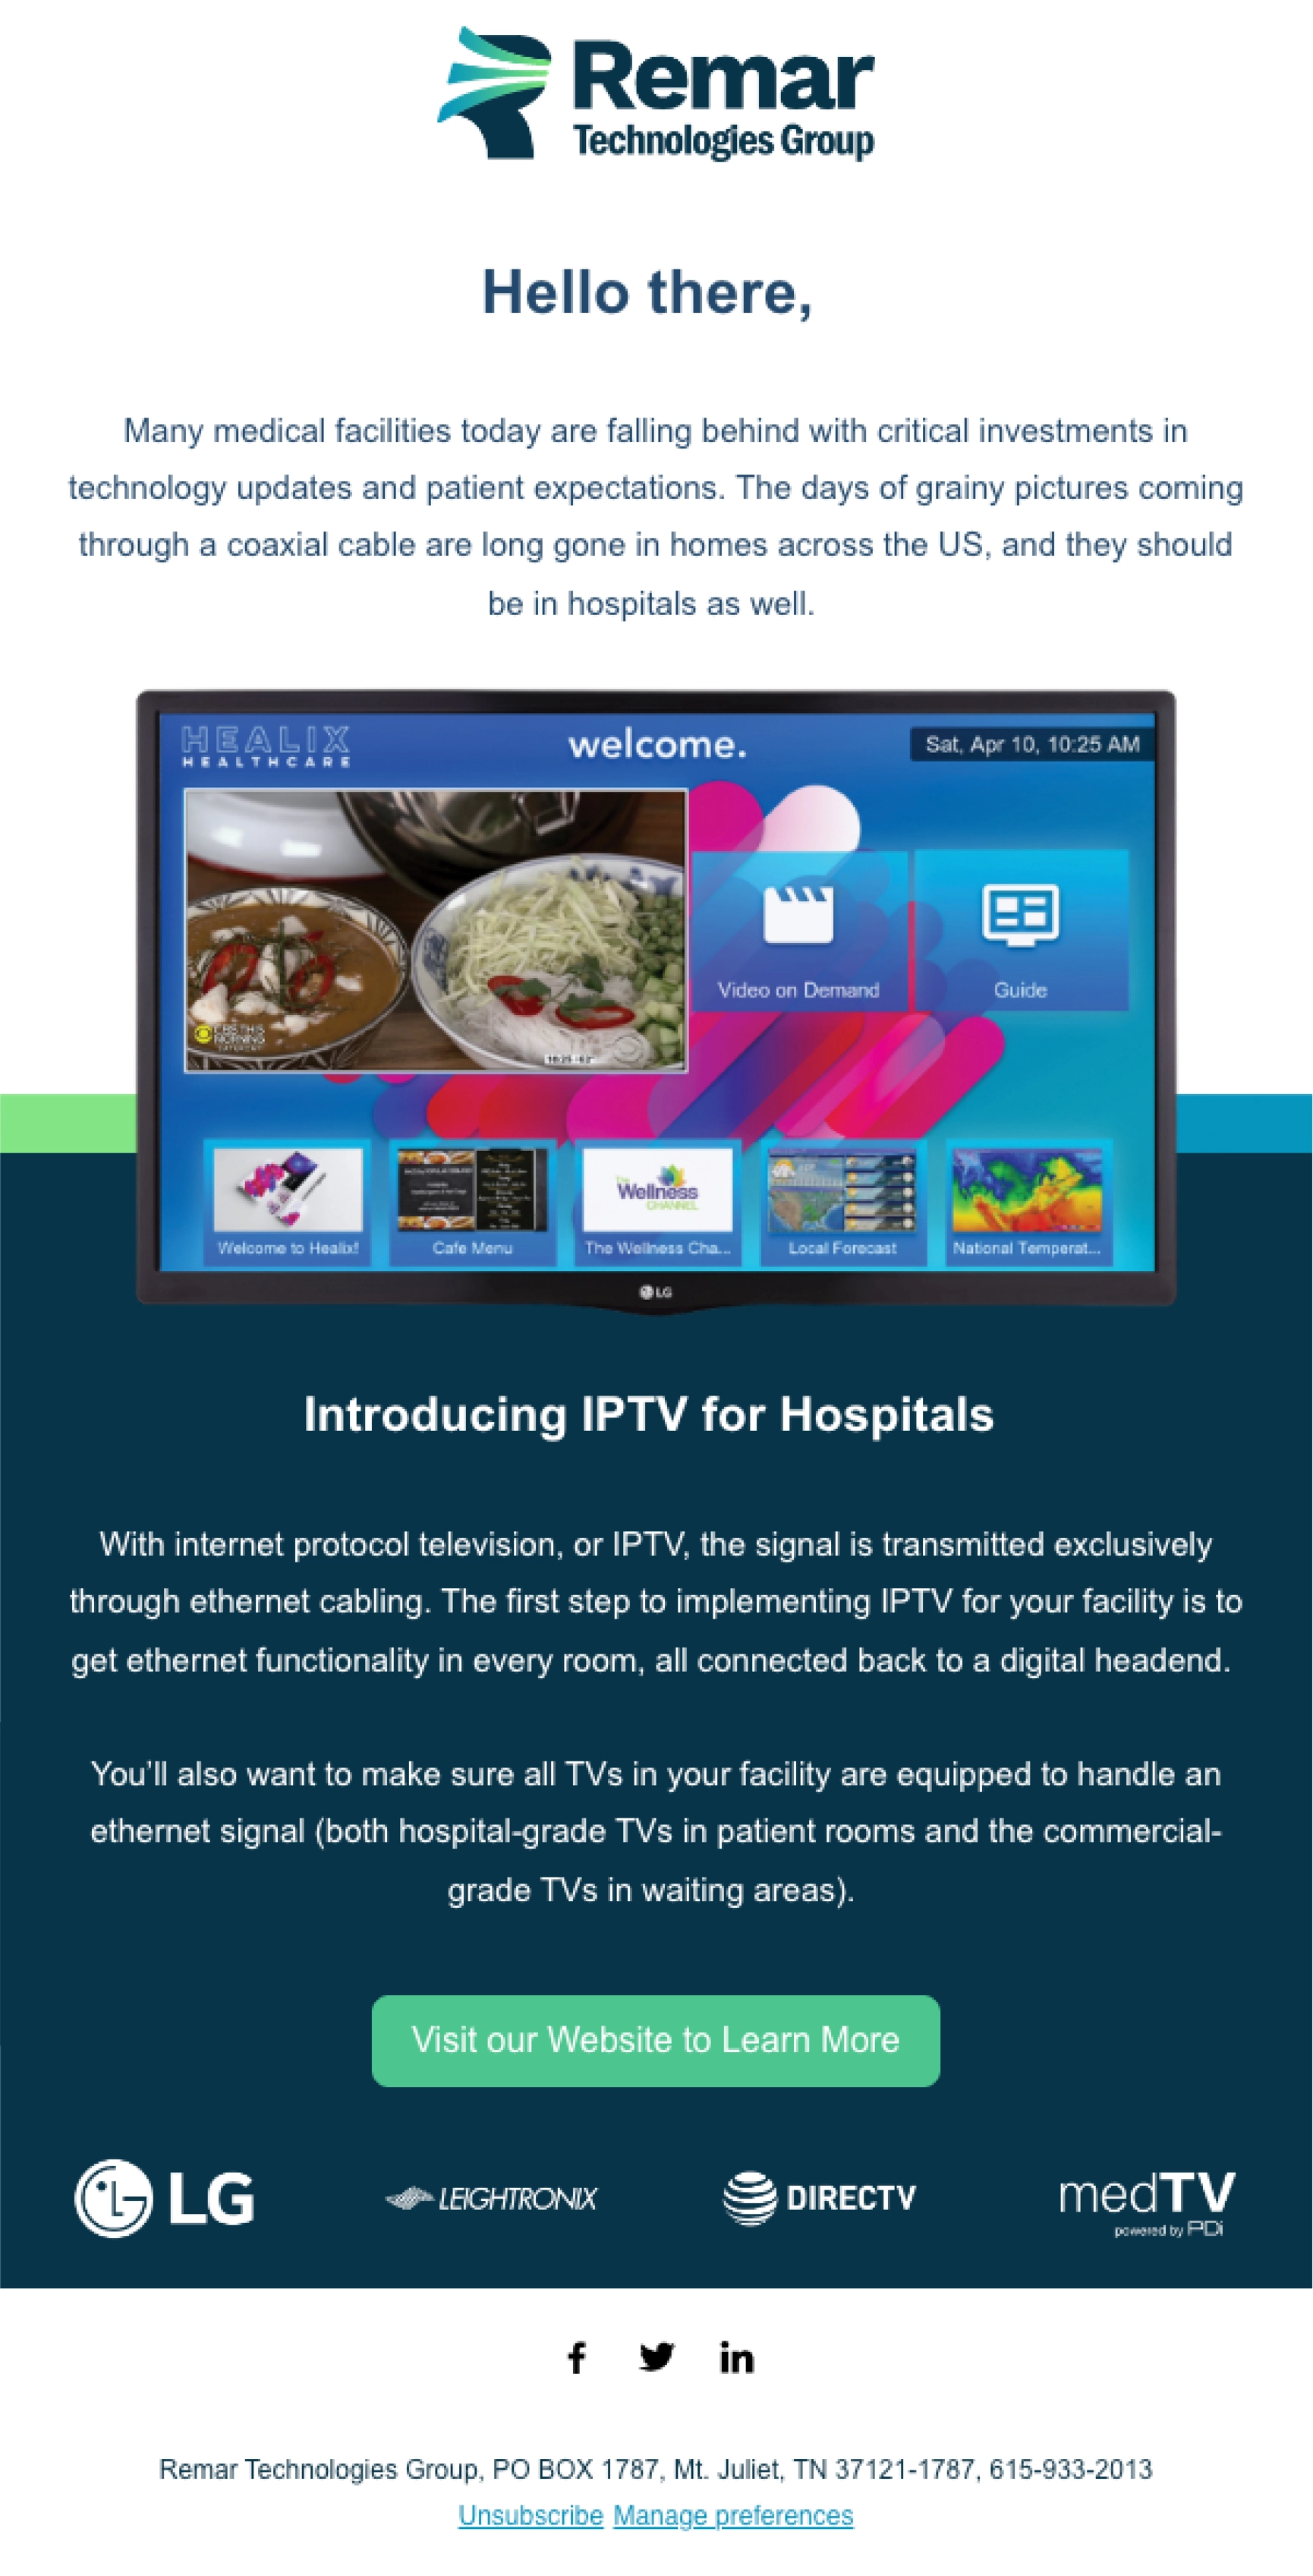 Remar Technologies Group Introducing IPTV for Hospitals email design